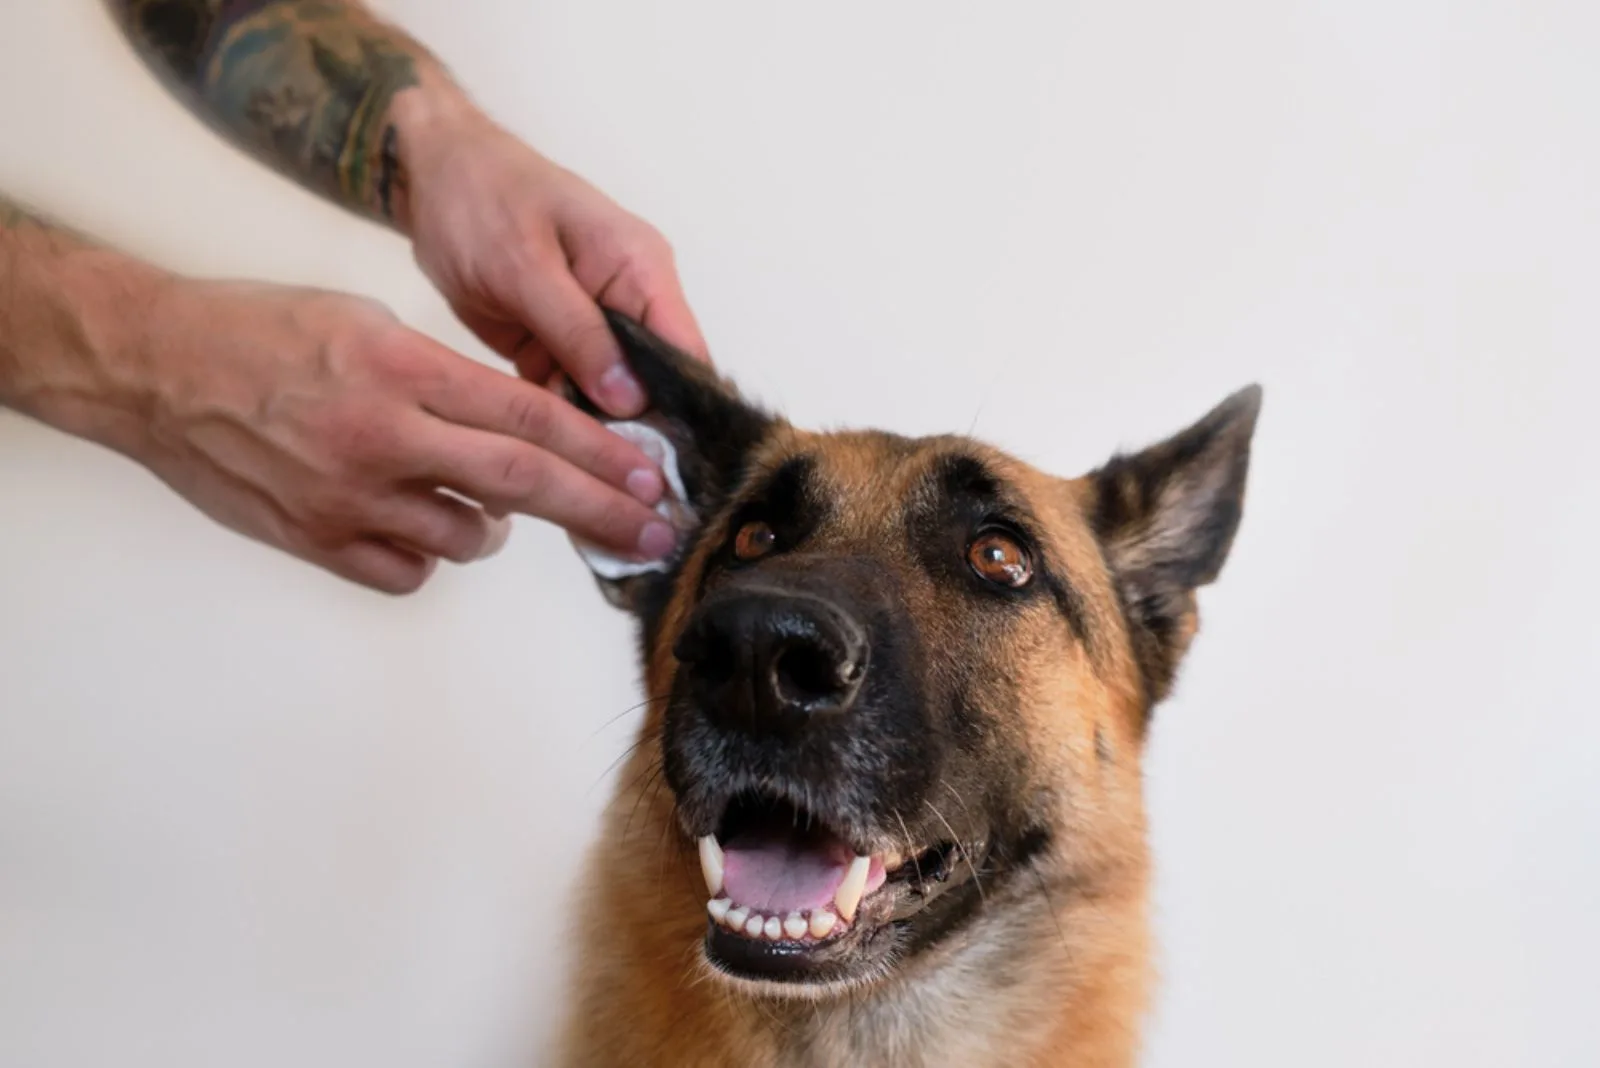 a man cleans dogs ears with cotton swab at home